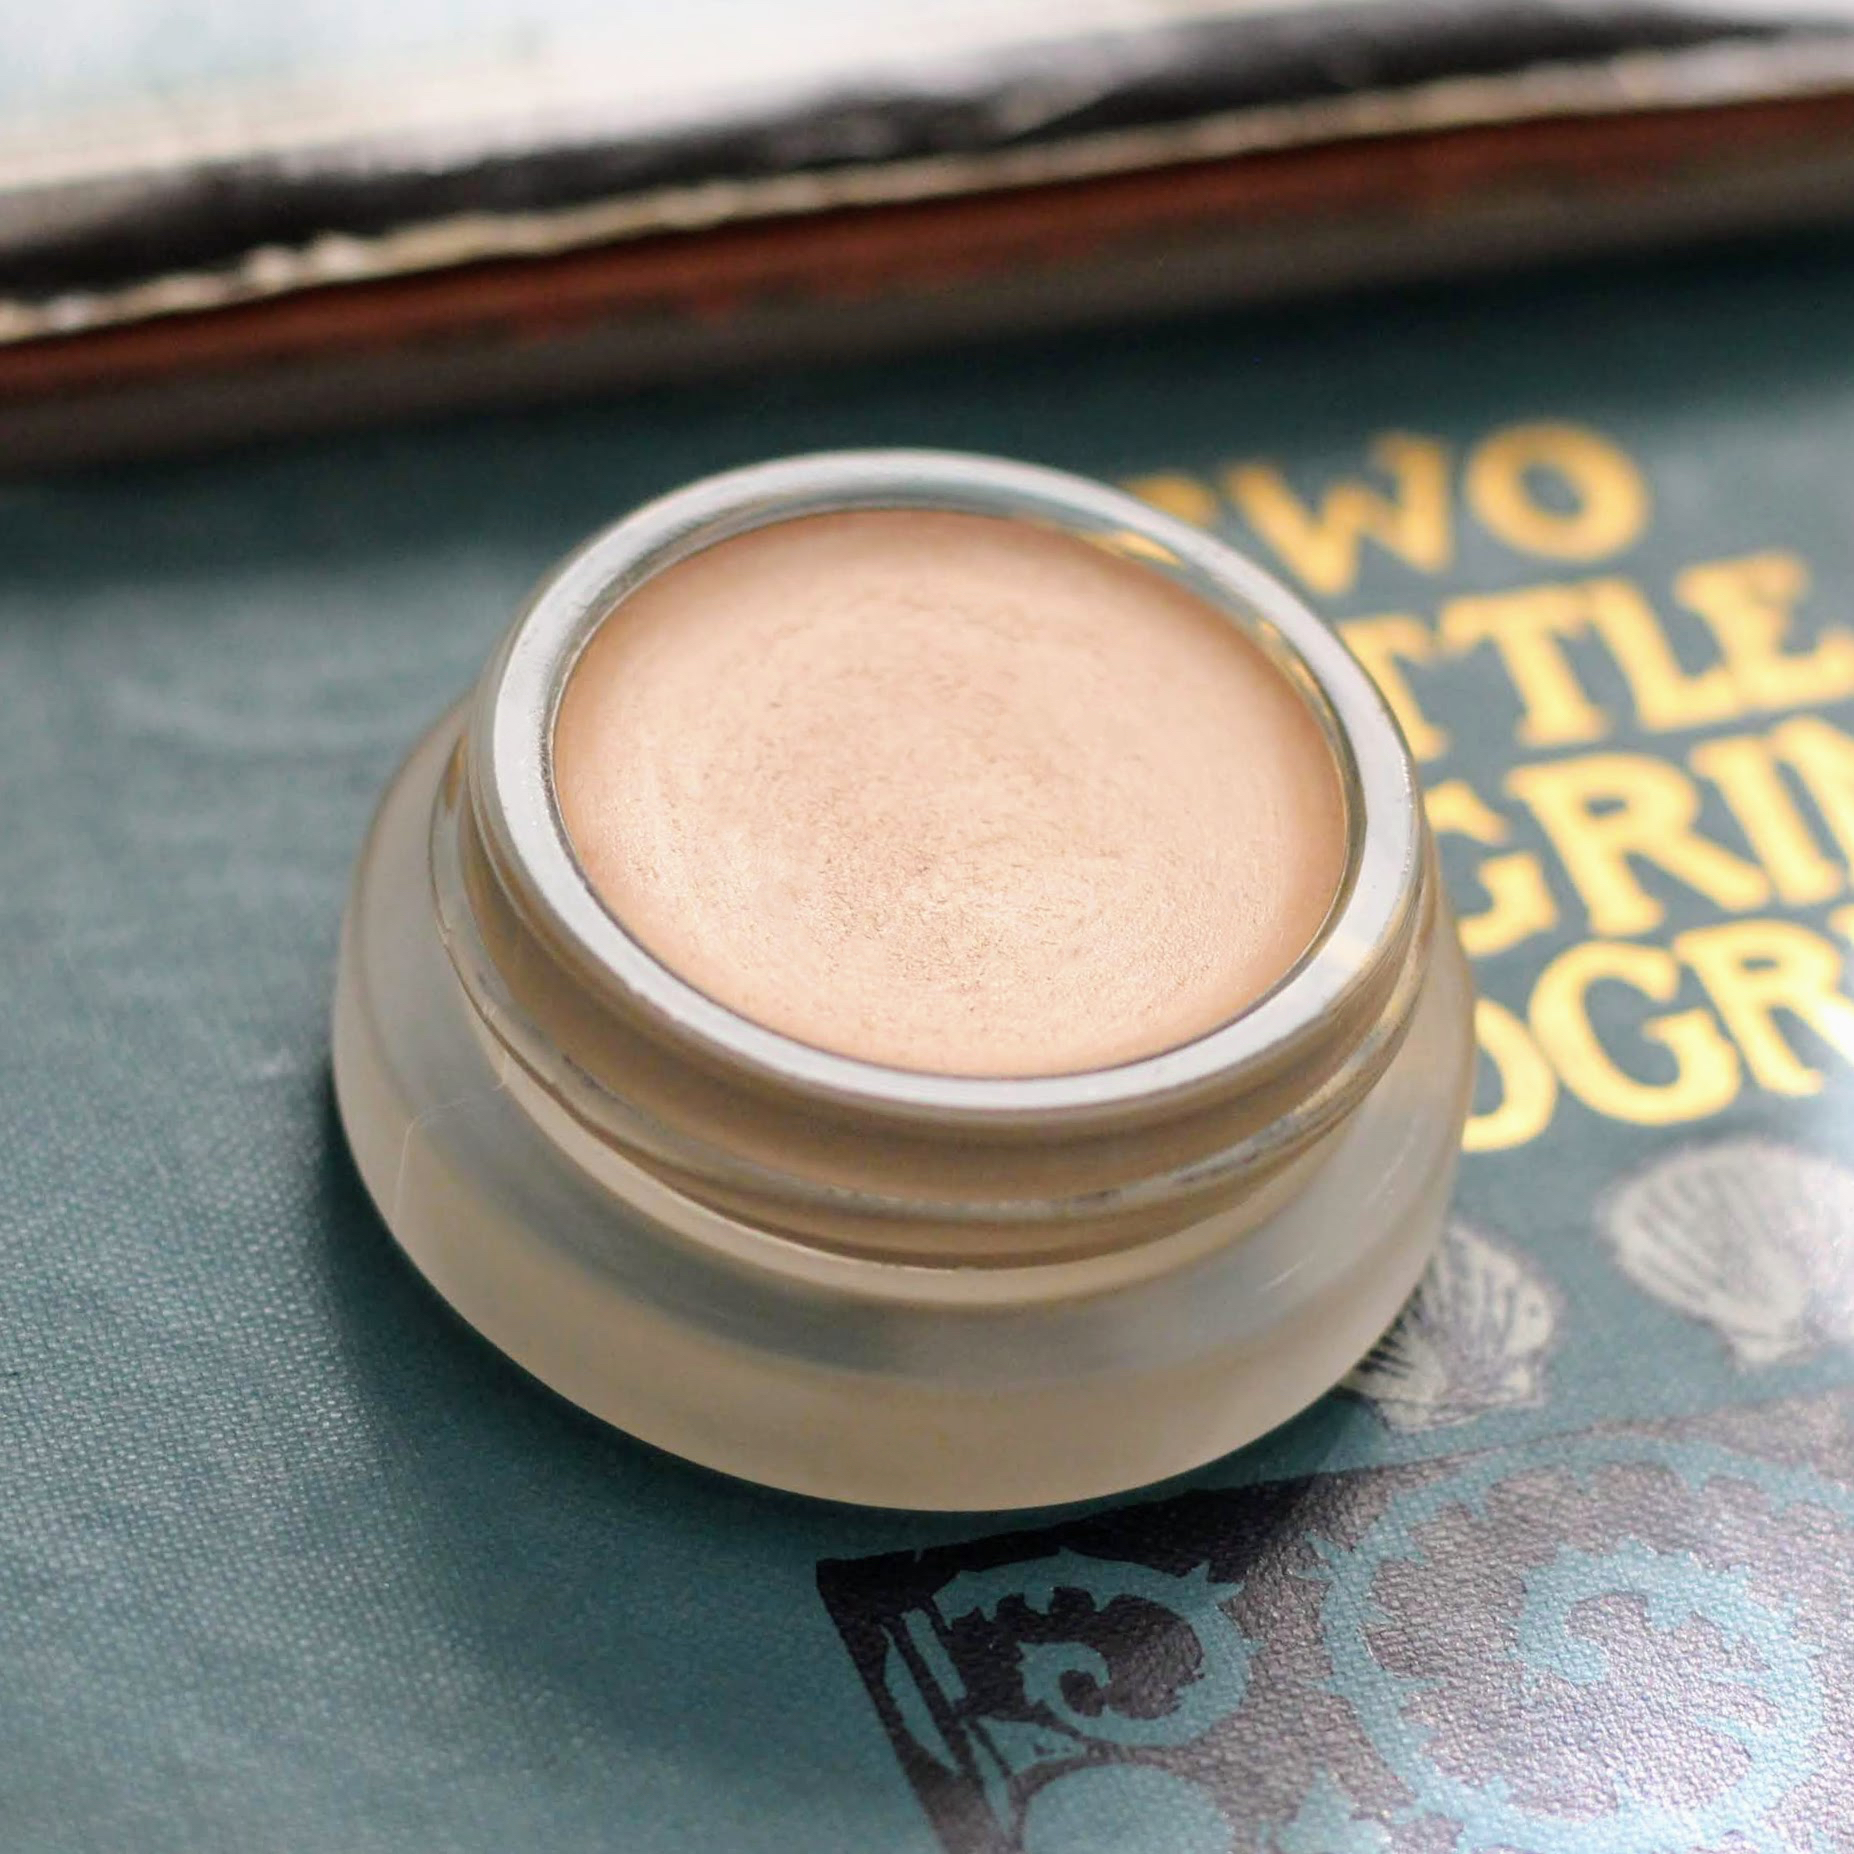 RMS luminizer review